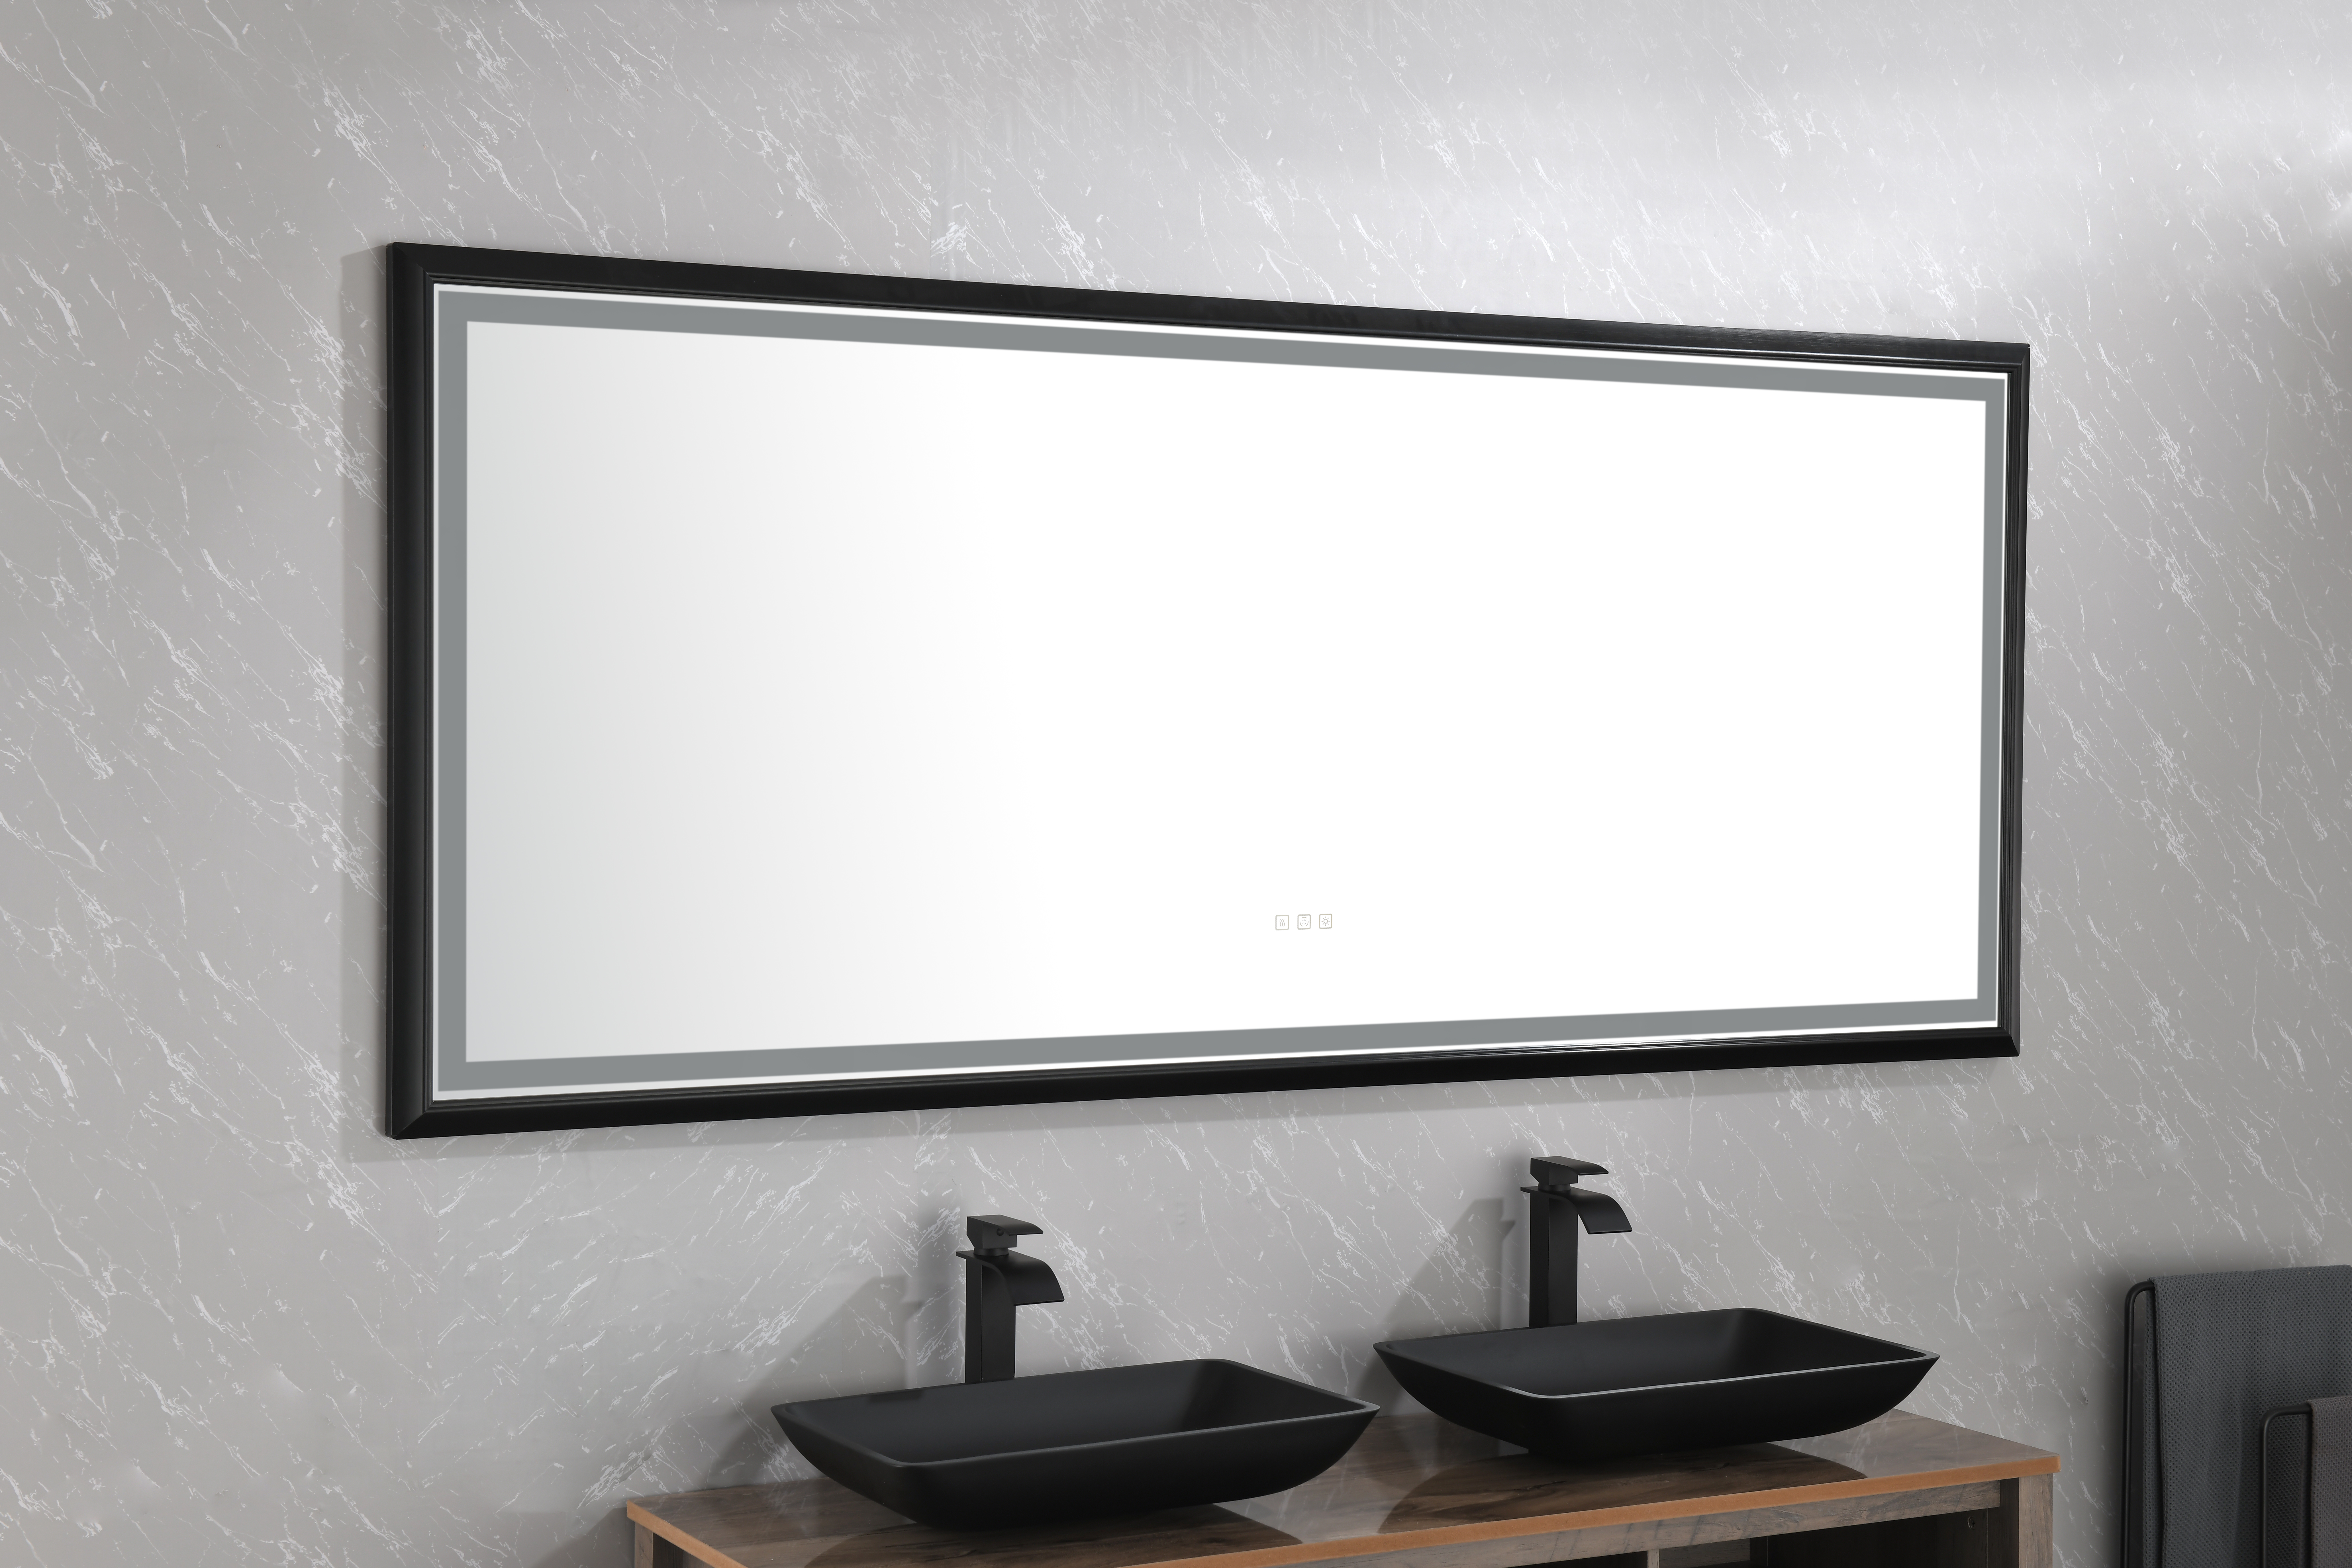 88 in. W x 38 in. H Oversized Rectangular Black Framed LED Mirror Anti-Fog Dimmable Wall Mount Bathroom Vanity Mirror \\\\\\\\n\\\\\\\\nHD Wall Mirror Kit For Gym And Dance Studio 38 X 88Inches With S-CASAINC